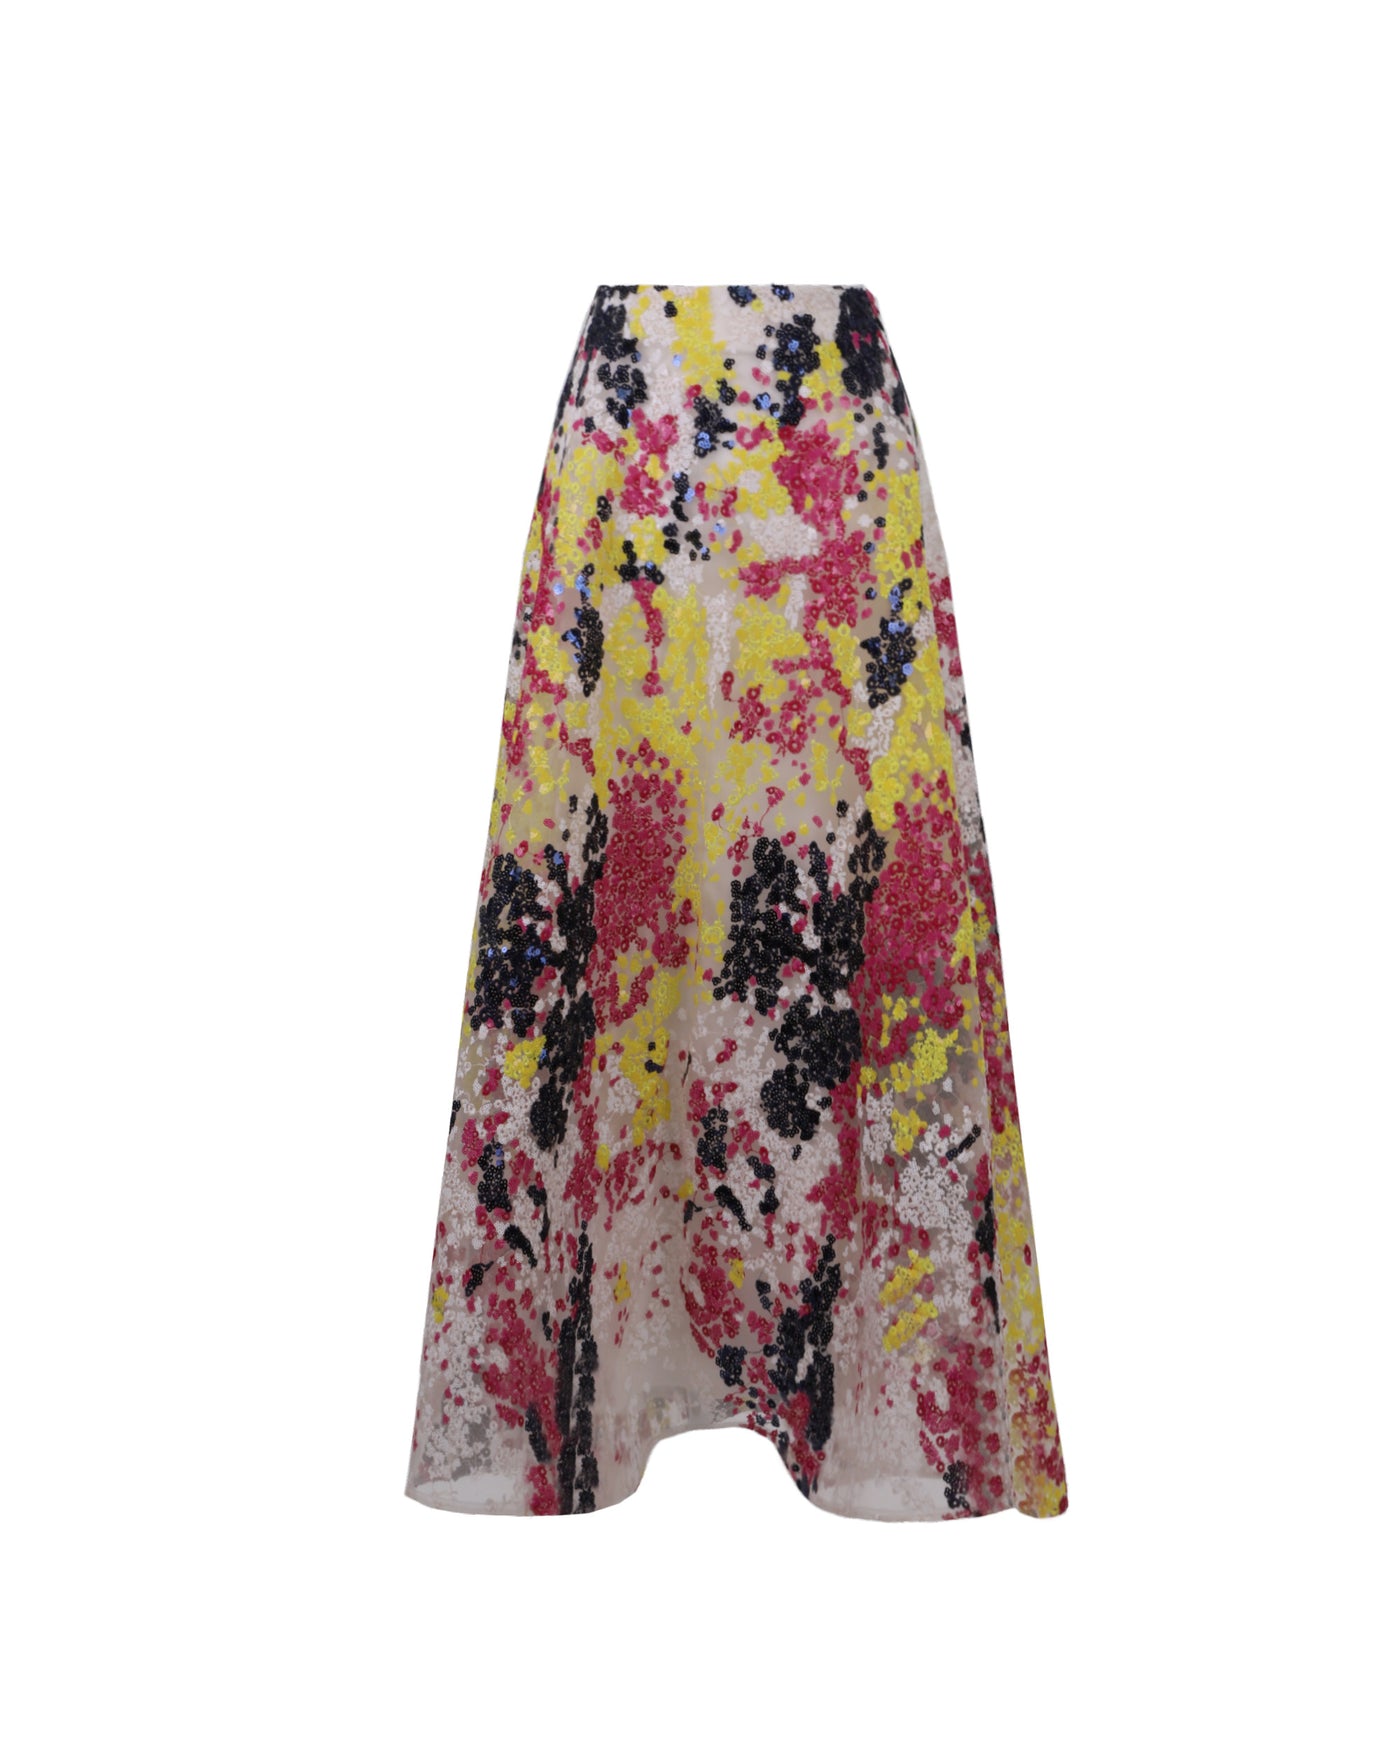 Embroidered Flared Skirt